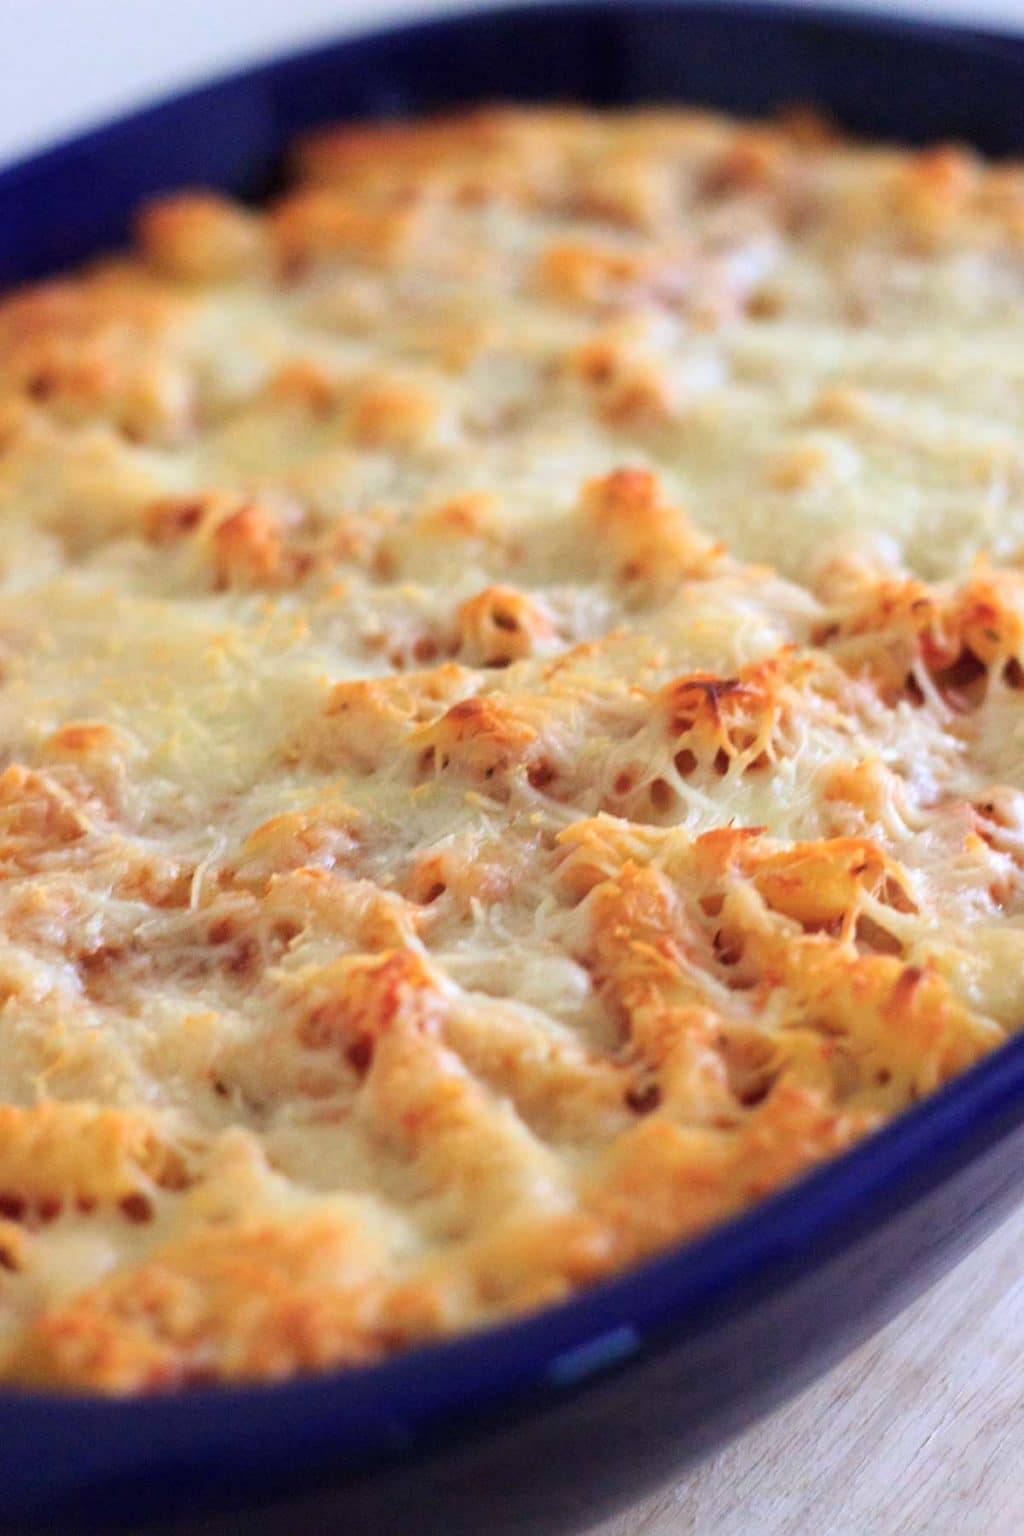 My grandma's meatless baked ziti will quickly become a family favorite. Requires only 5 ingredients! Easy comfort food that you can make ahead or freeze for later.